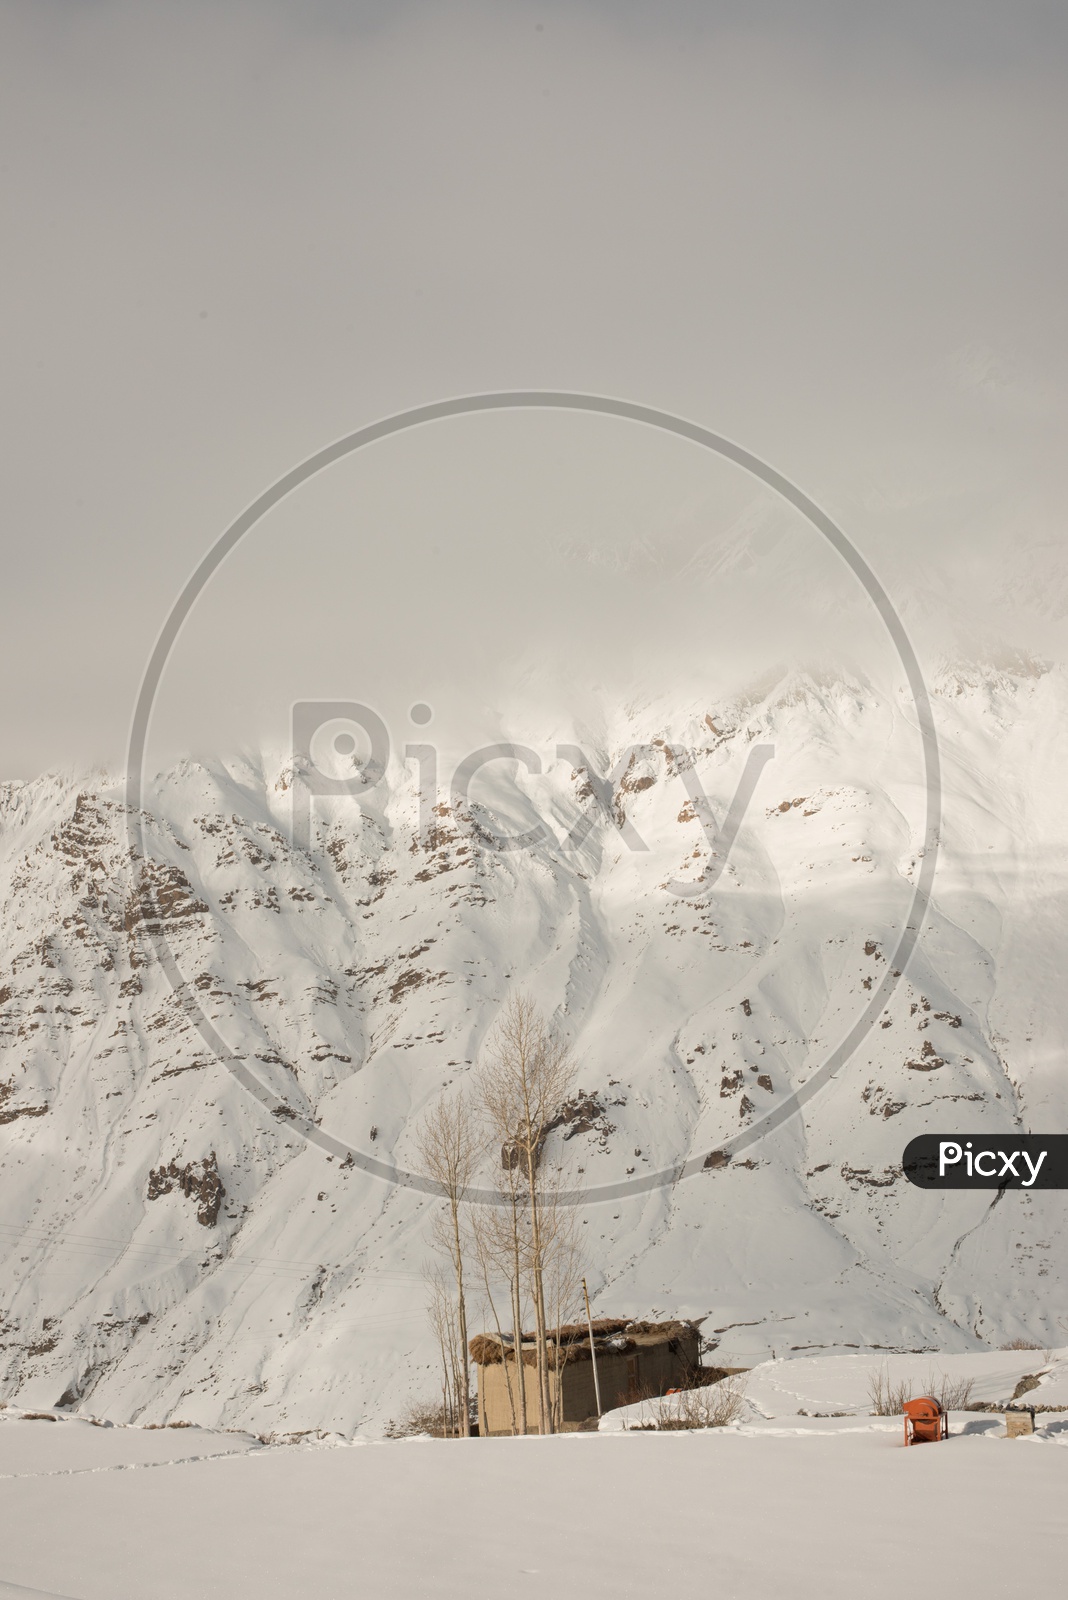 Landscapes of Spiti Valley with Snow Covered Mountains